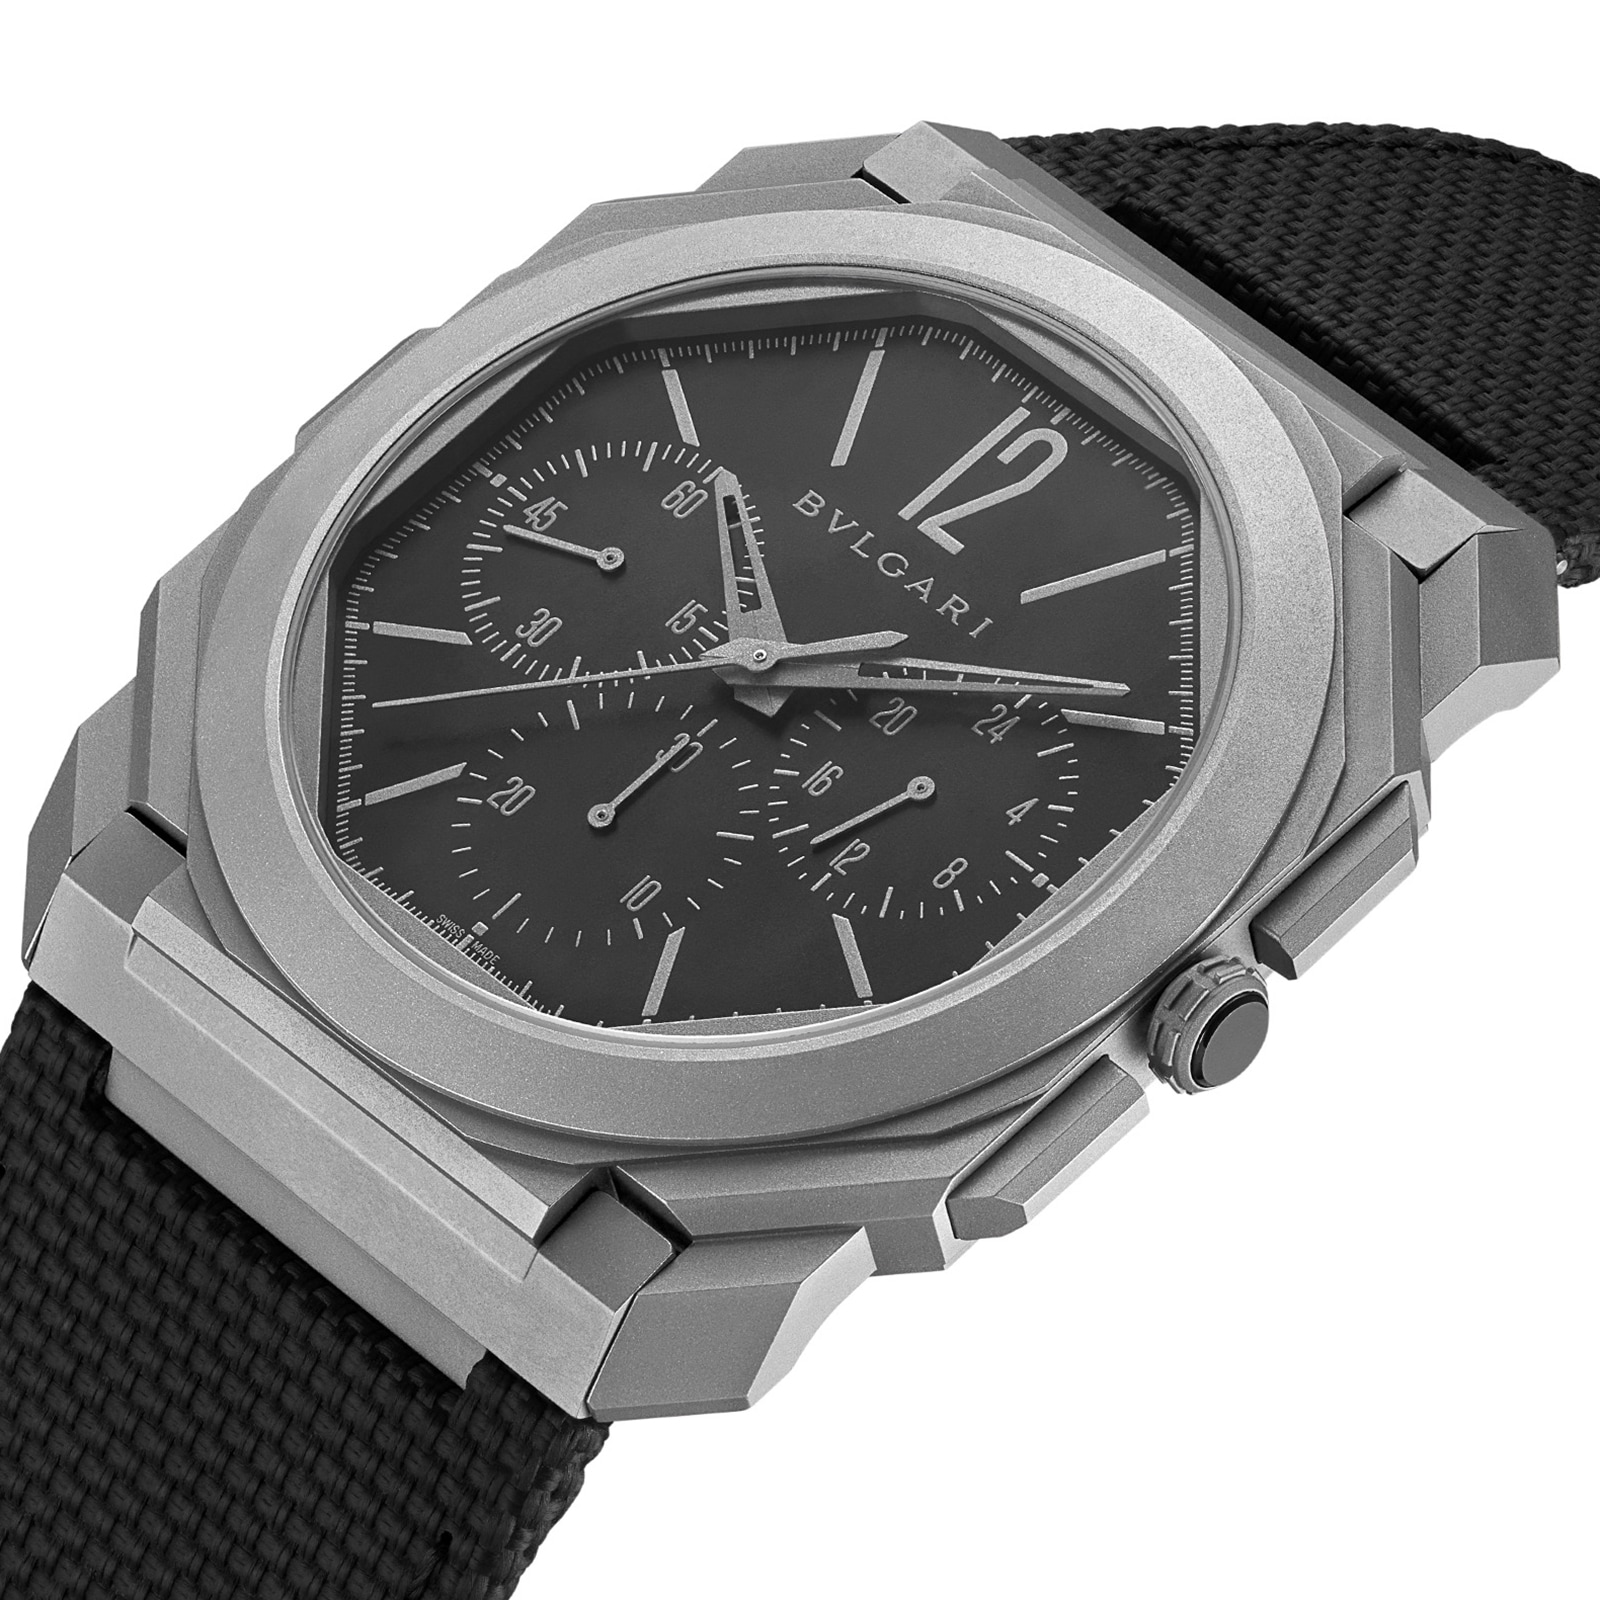 Titanium Octo Finissimo 42mm Black Dial Chronograph Gents Watch